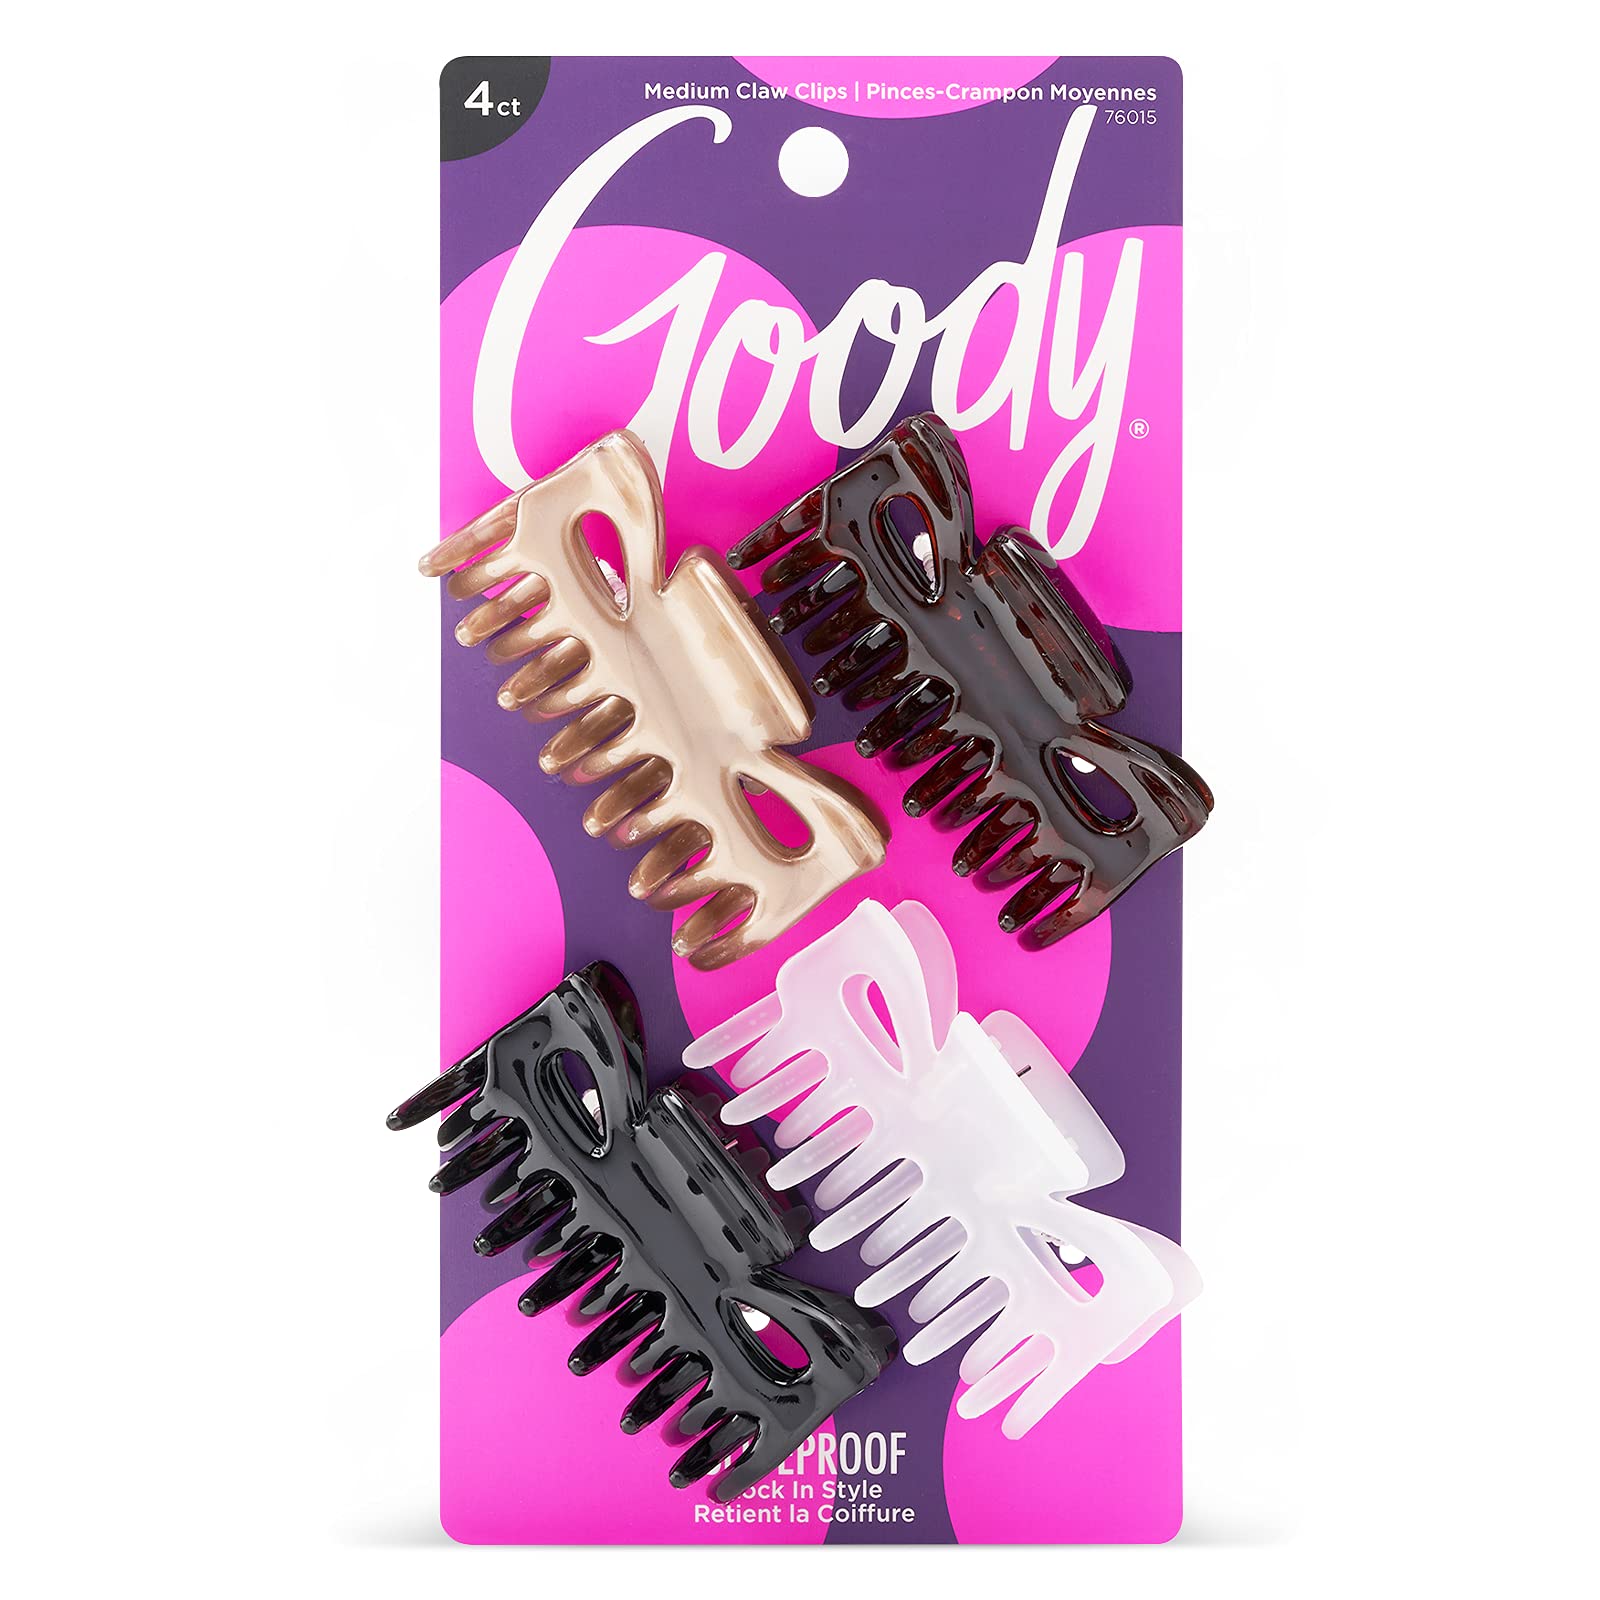 Goody Classics Medium Claw Clips , Assorted Colors - Amazon Now $1.79 -58% Free Shipping w/ Prime